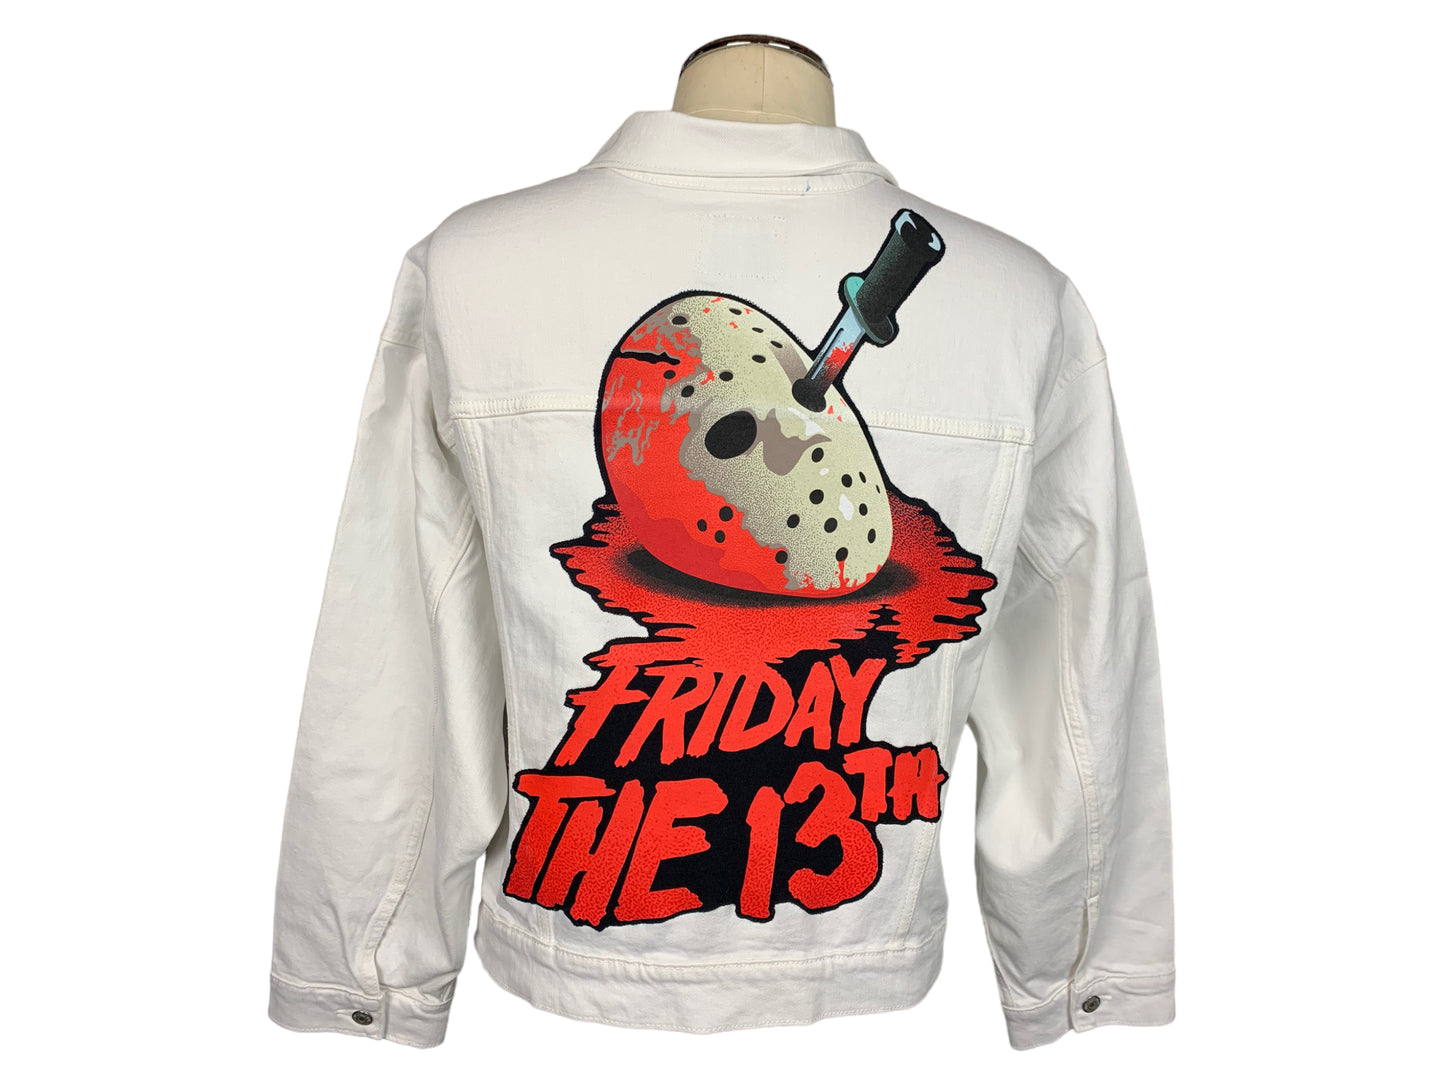 Friday the 13th Reworked Jean Jacket Ladies 4XL